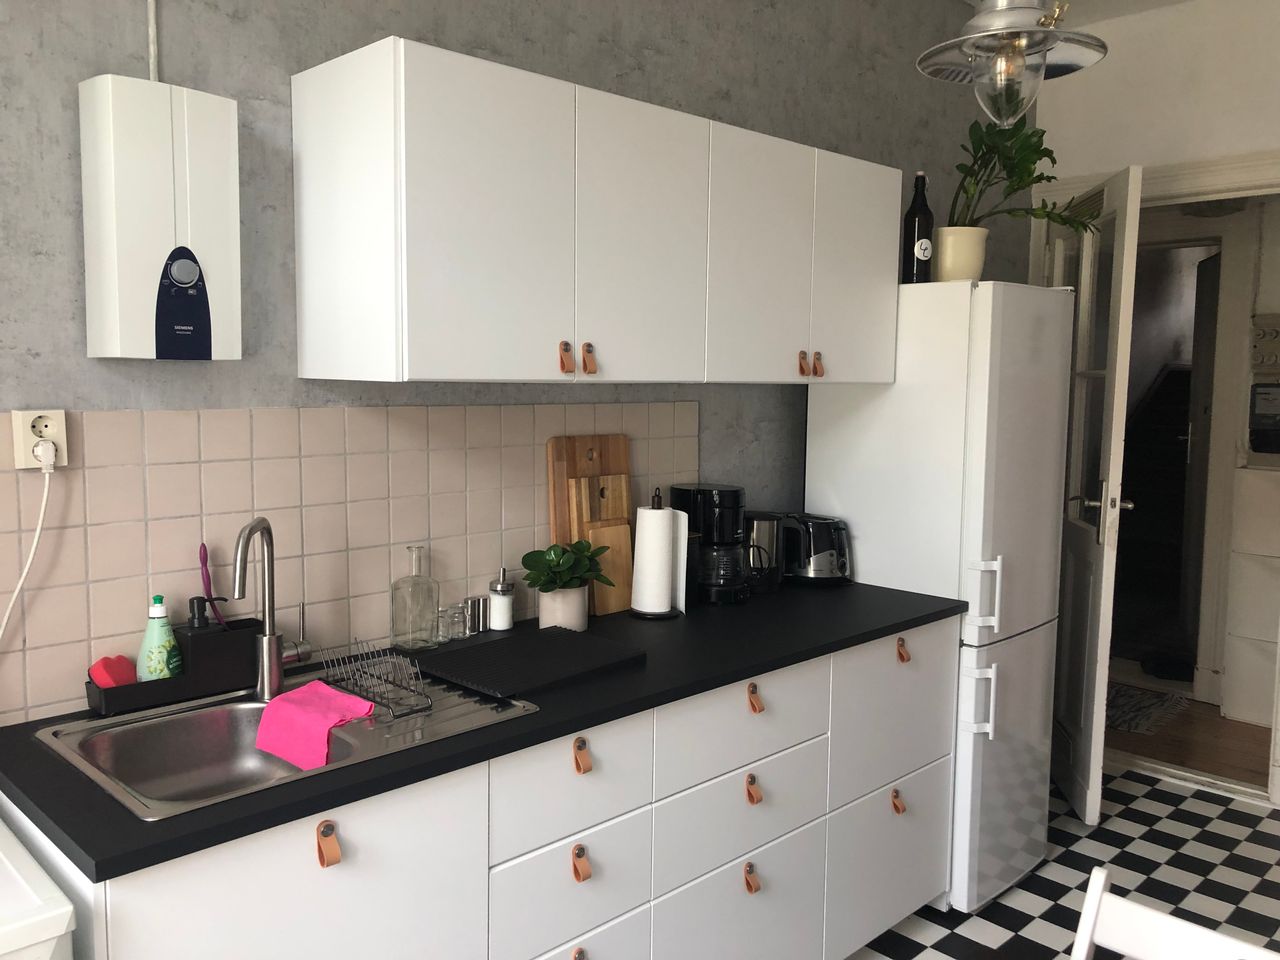 Modern and nice suite with balcony in trendy Reuterkiez located in Neukölln